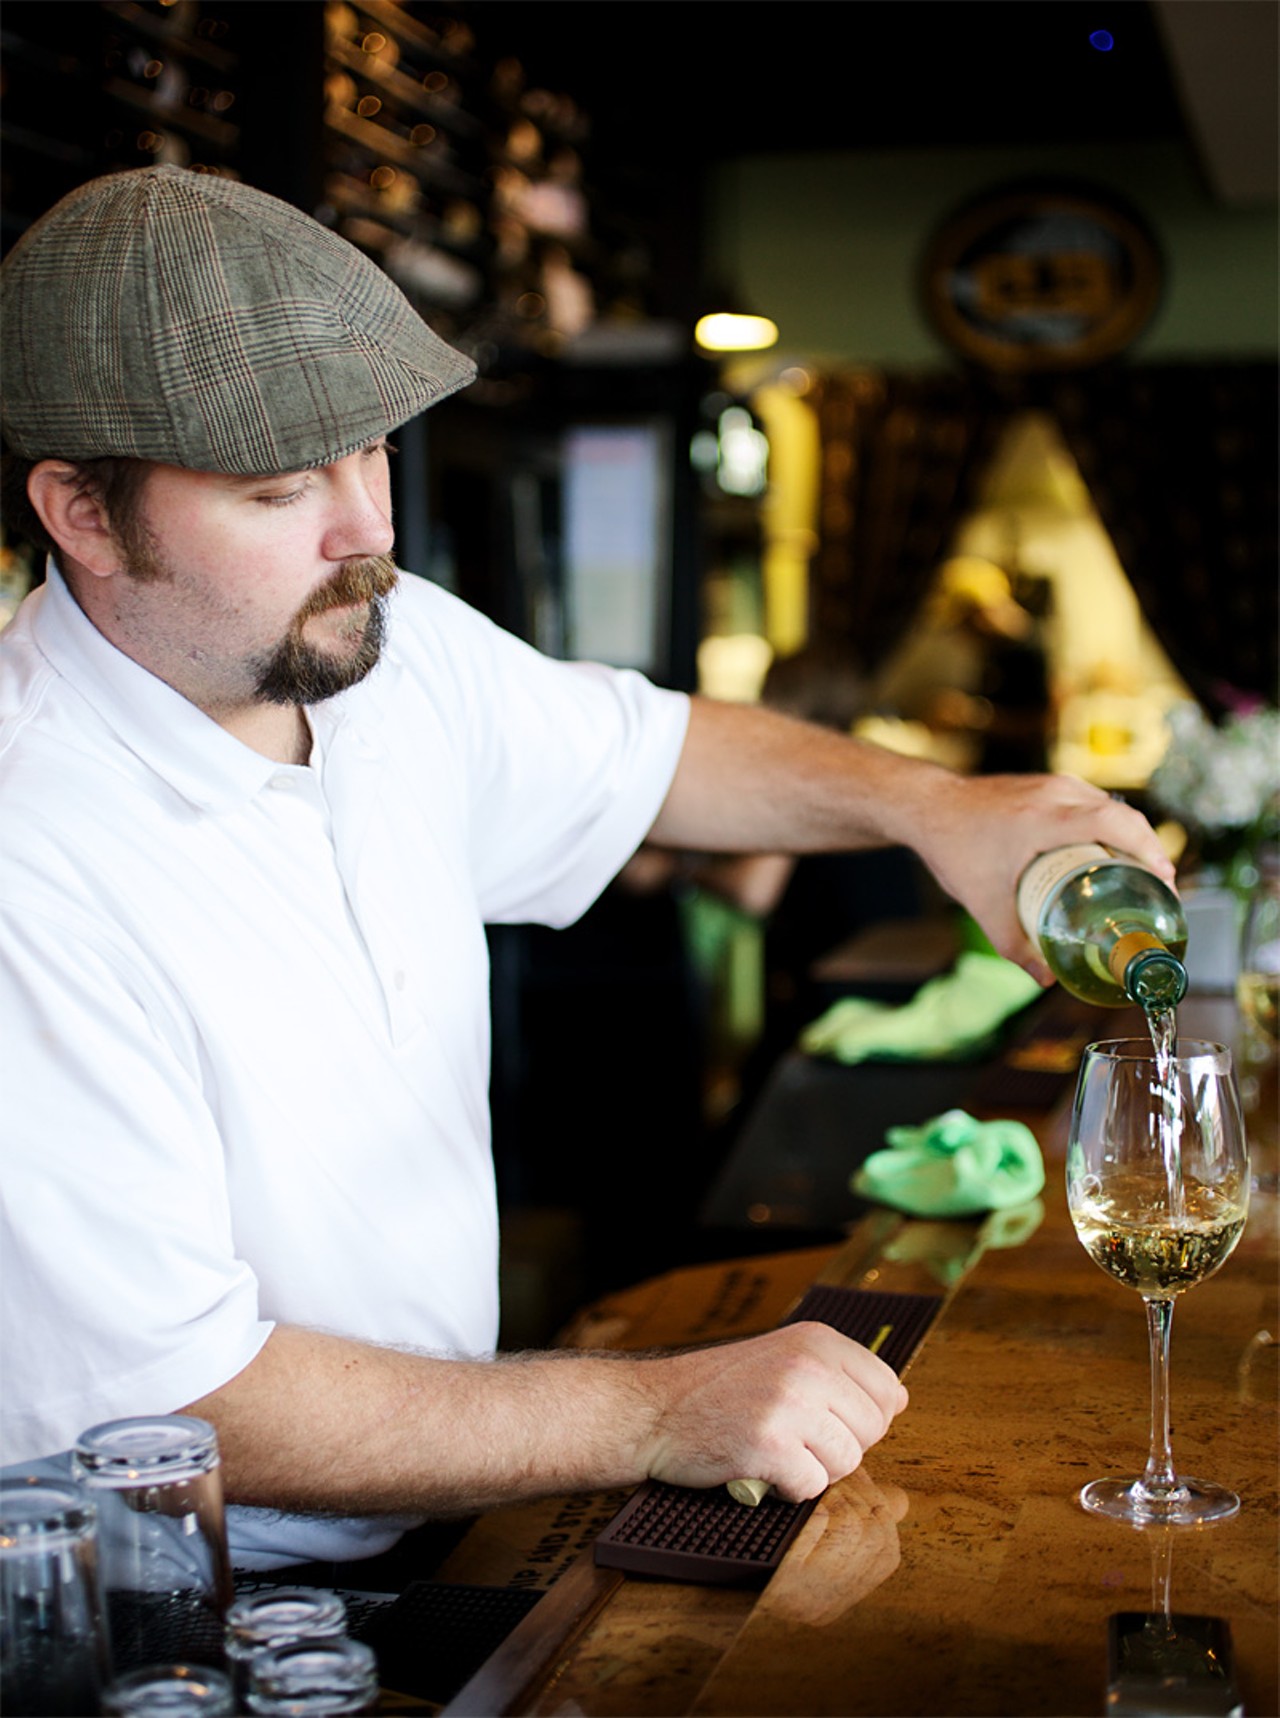 Owner Mike Lonero pouring a glass of wine at Cork Wine Bar.